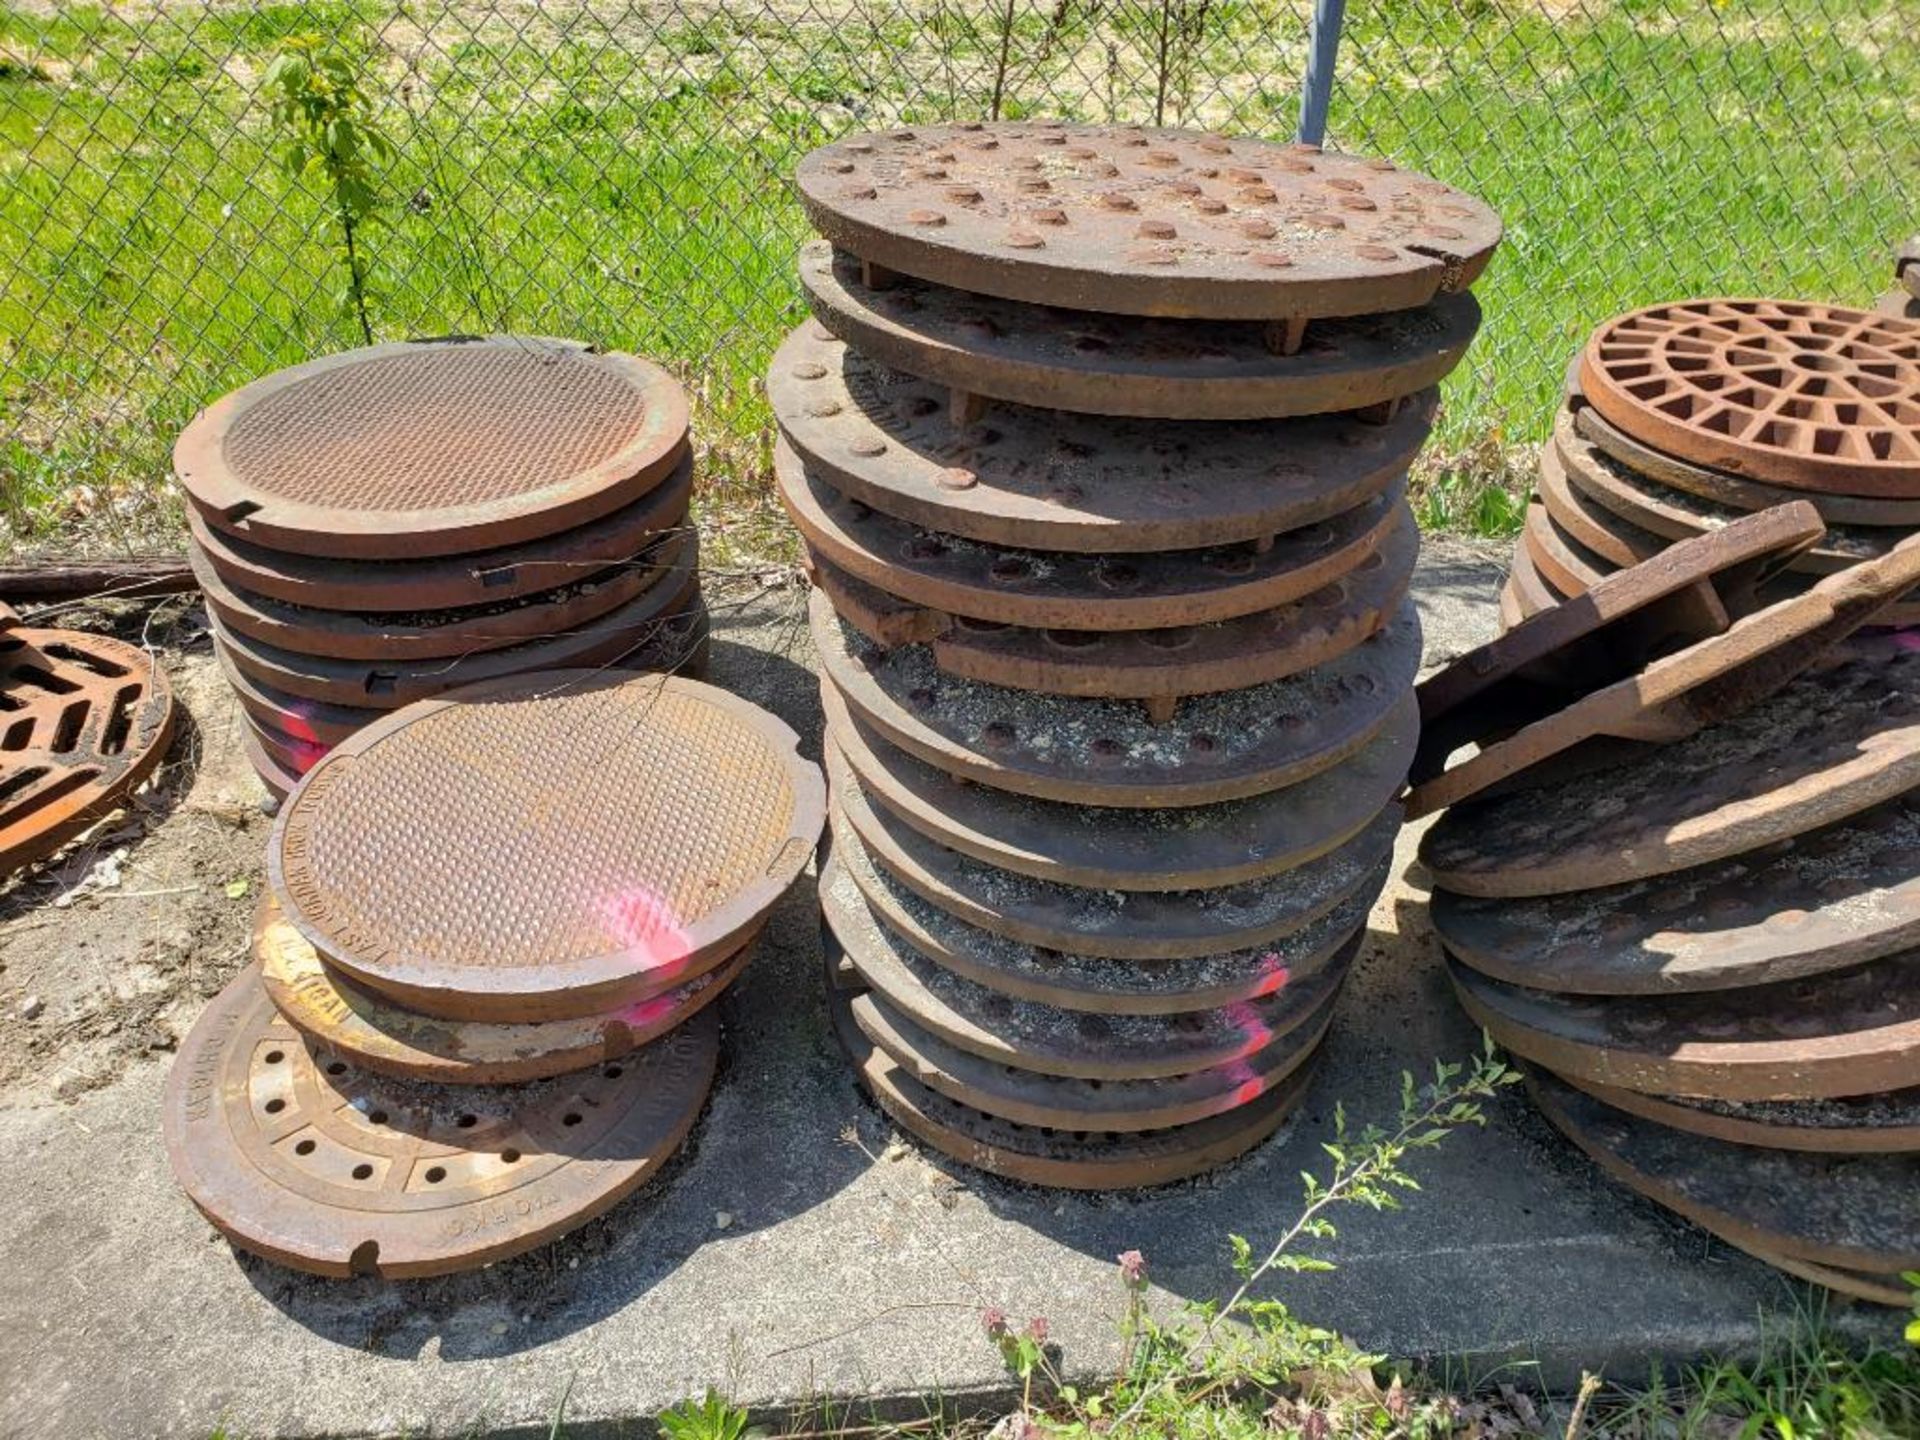 Assorted man hole covers. (units with pink marking are NOT included in lot) - Image 3 of 5